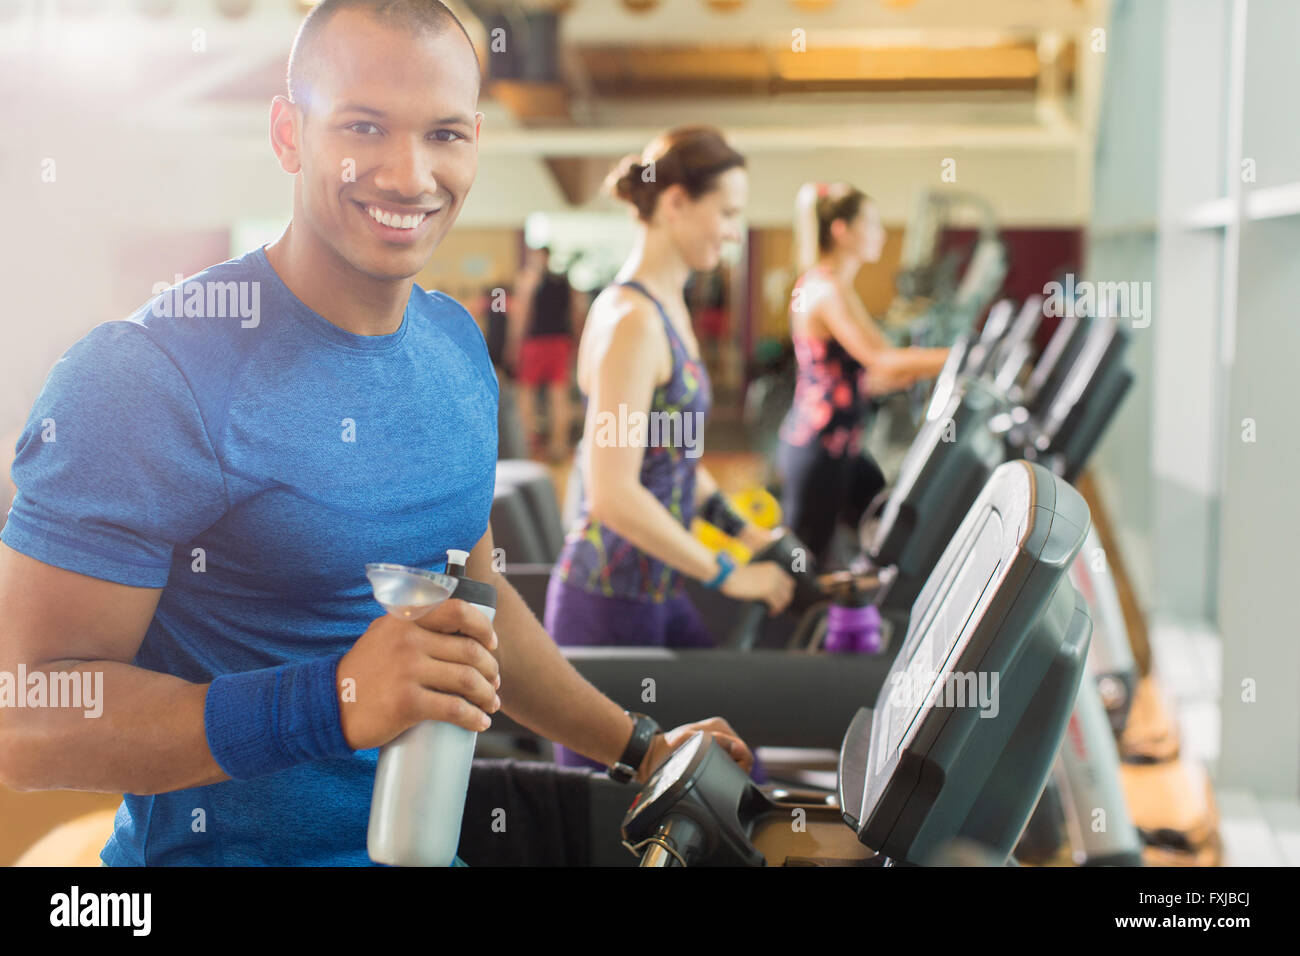 Portrait smiling man with water bottle on treadmill at gym Stock Photo